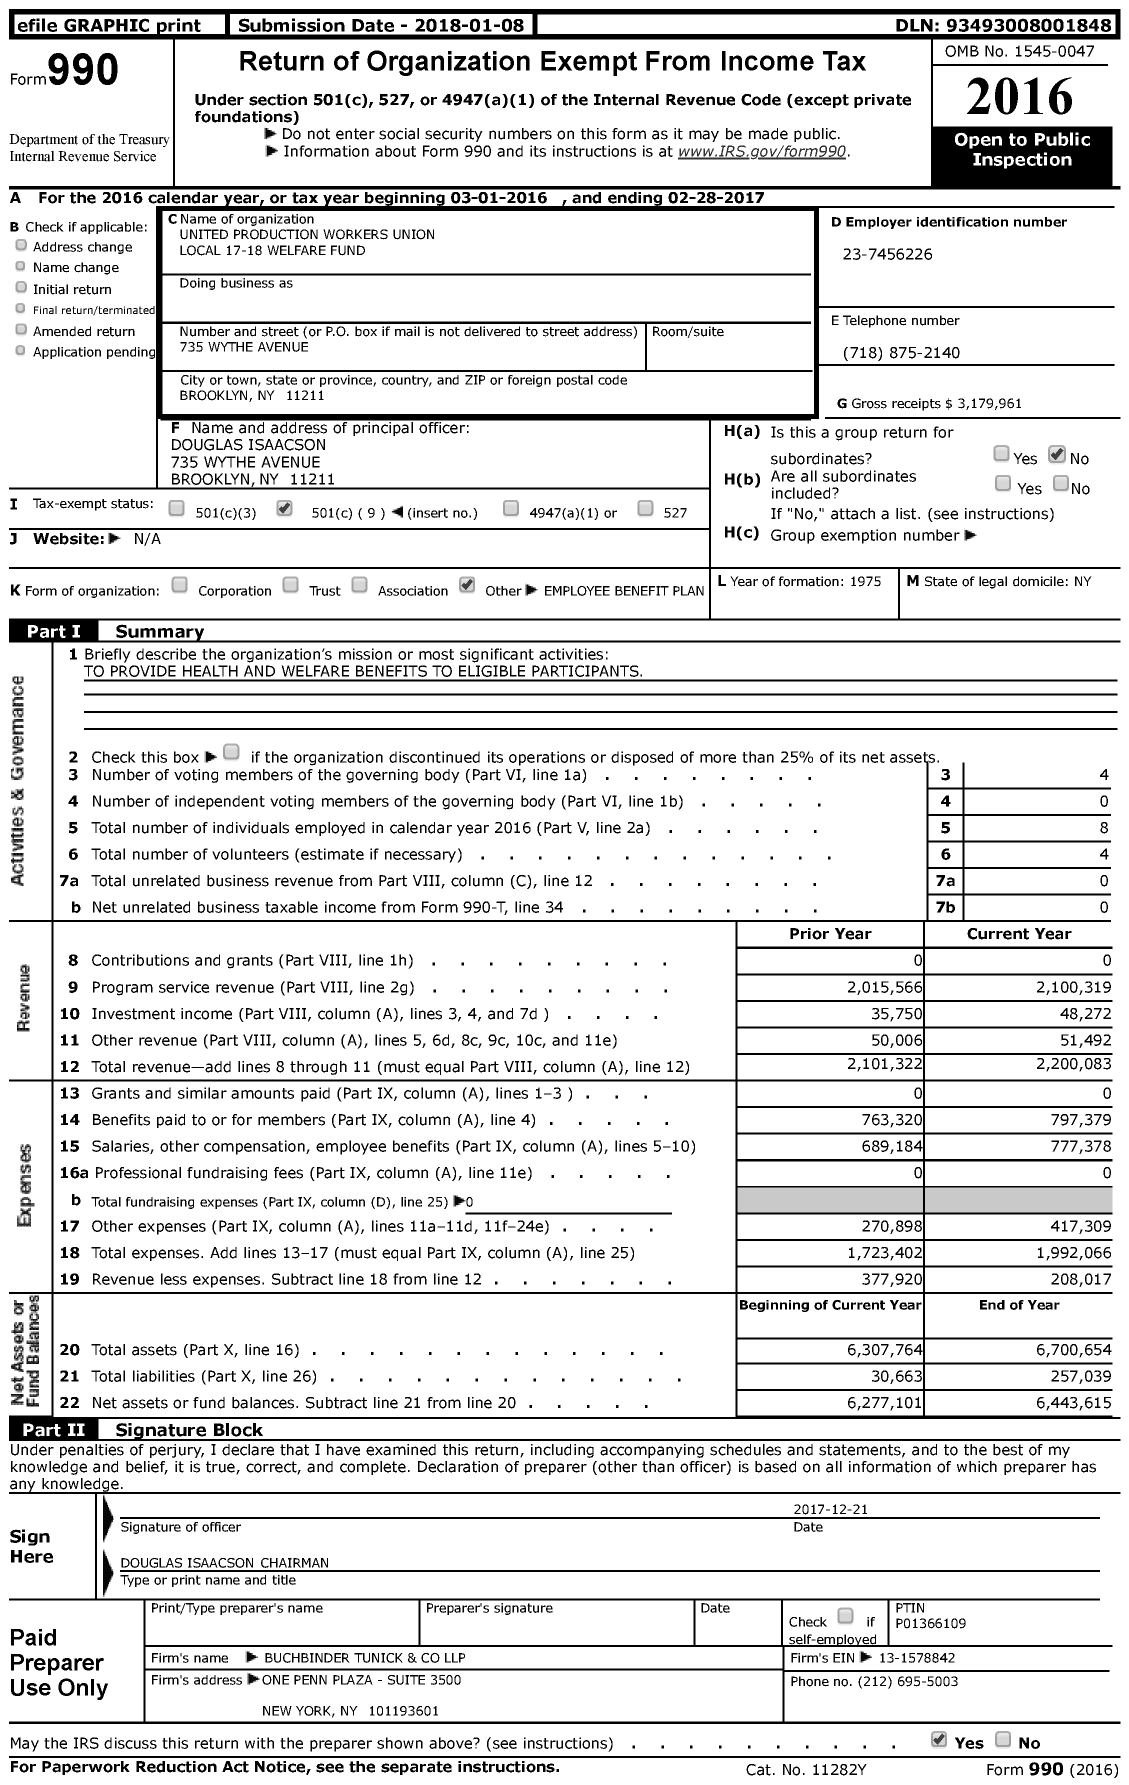 Image of first page of 2016 Form 990 for United Production Workers Union Local 17-18 Welfare Fund